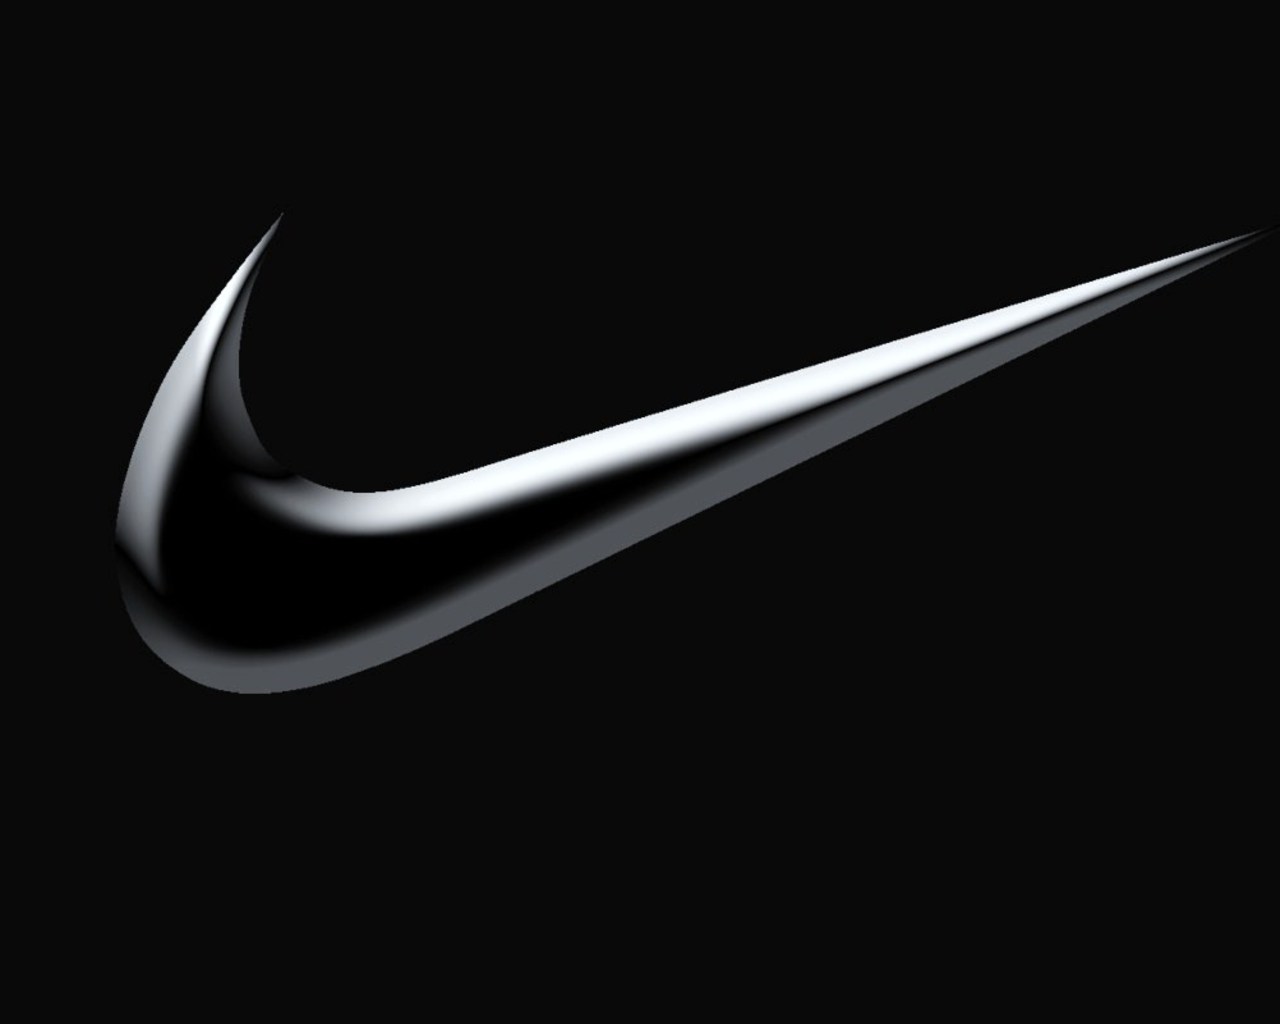 New Nike Logo HQ Wallpapers Worlds Greatest Art Site